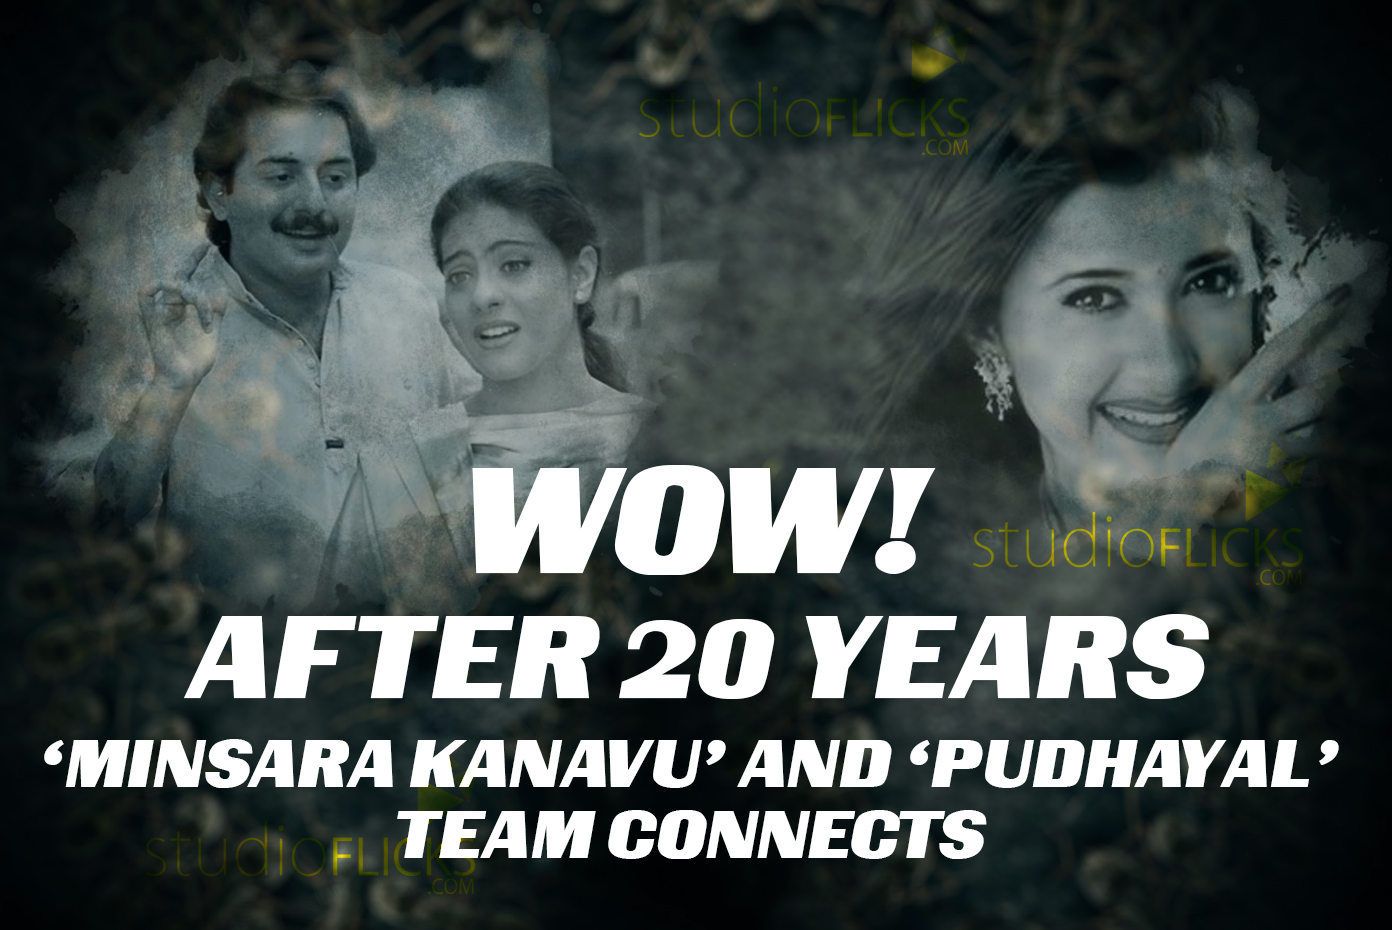 WOW! After 20 Years "Minsara Kanavu" & "Pudhayal" Team Connects First